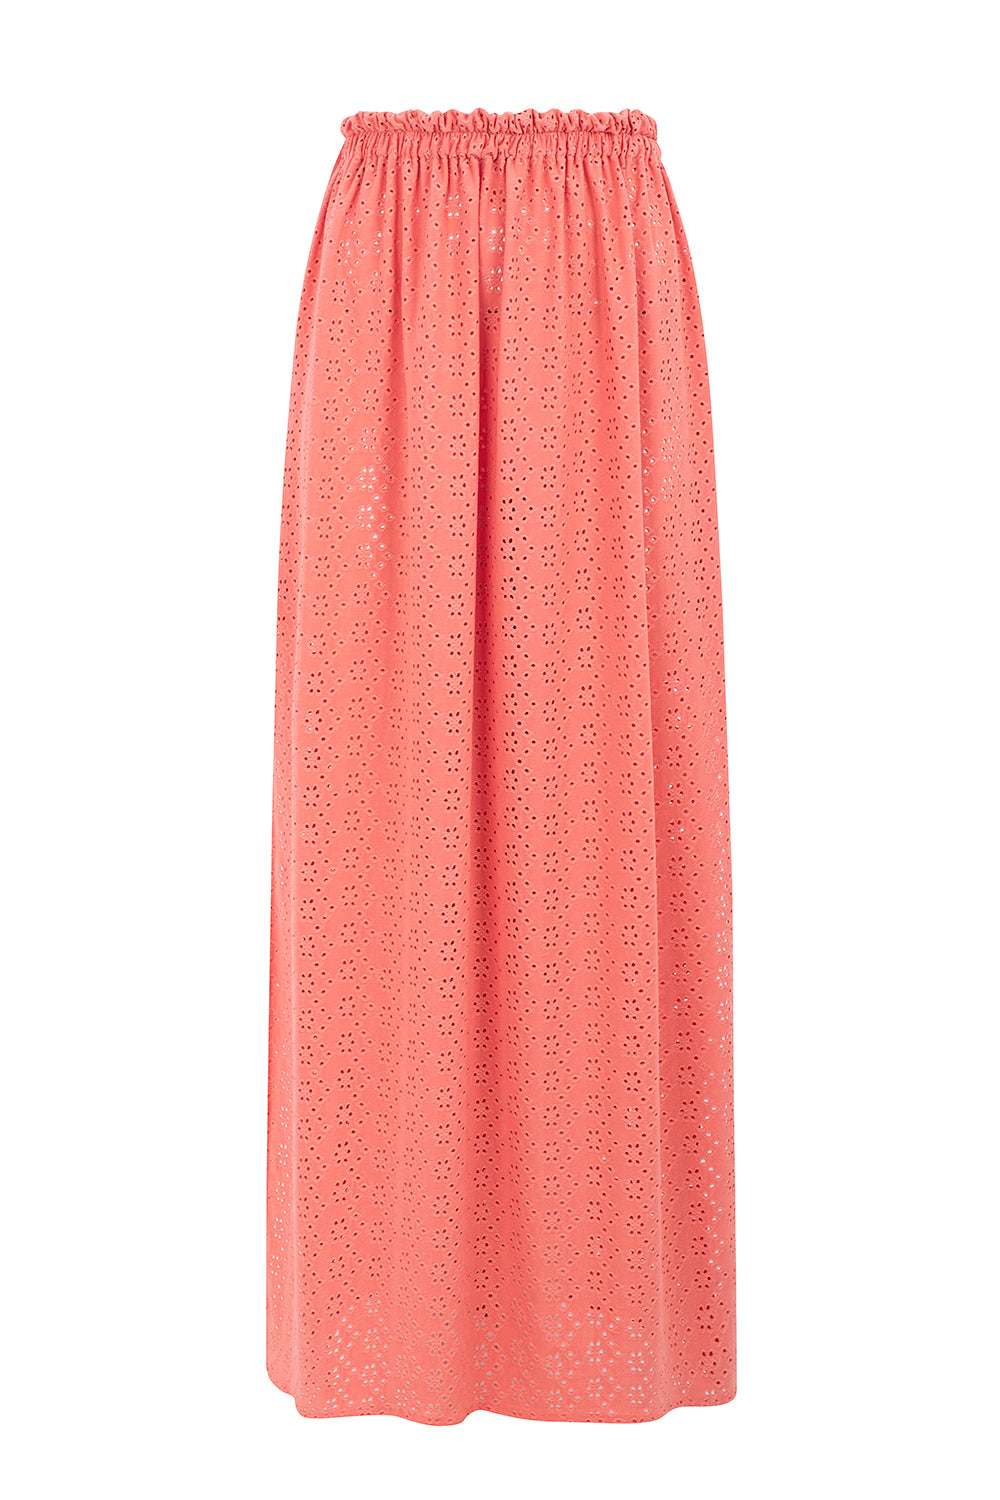 SALMON PUERTO BEACH SKIRT (OUT OF STOCK)